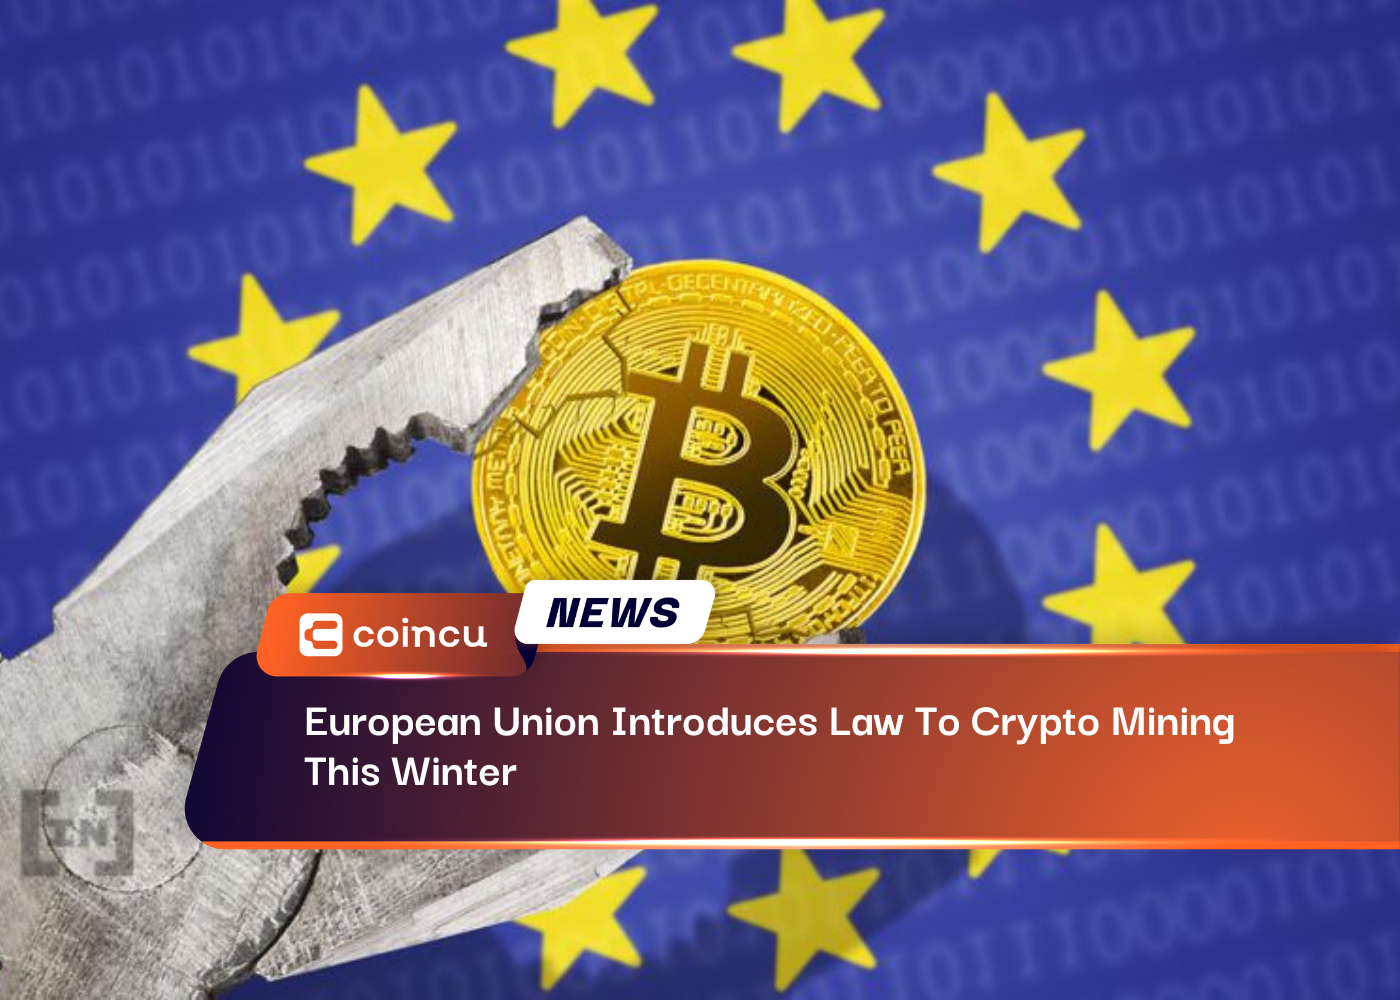 European Union Introduces Law to Ban Crypto Mining This Winter